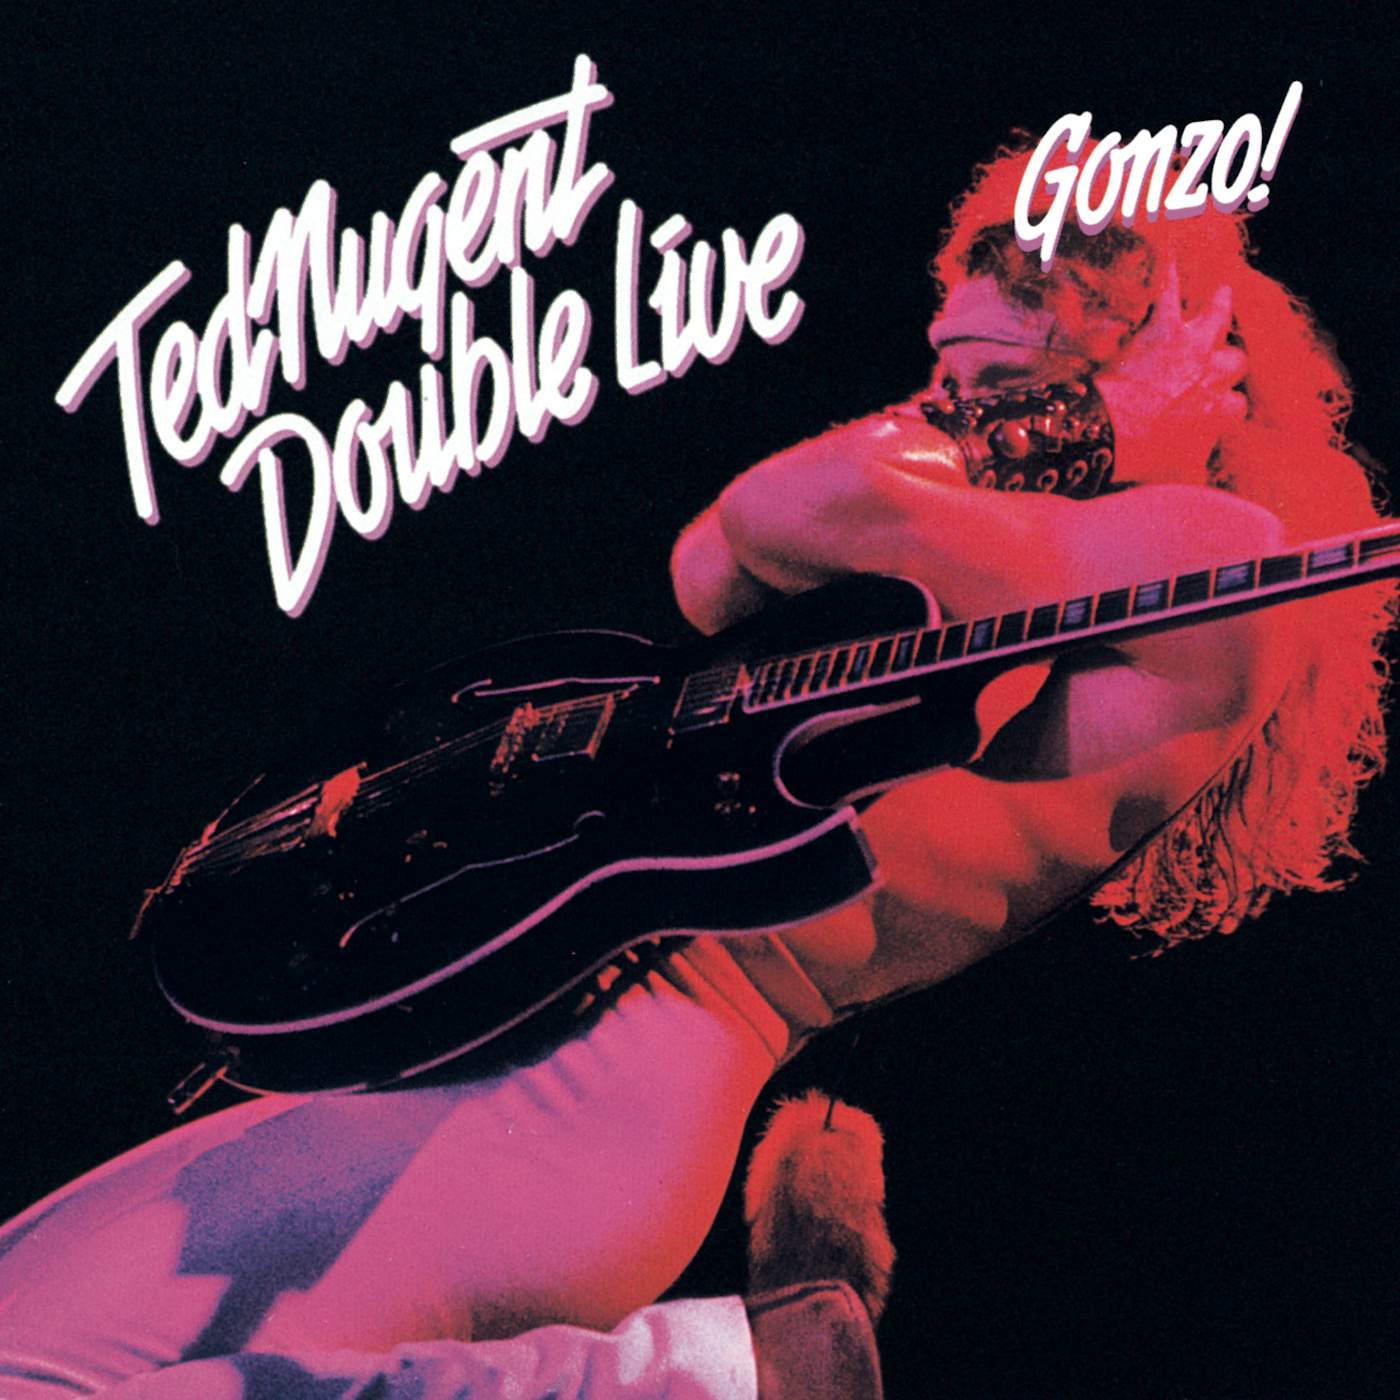 Ted Nugent DOUBLE LIVE GONZO CD